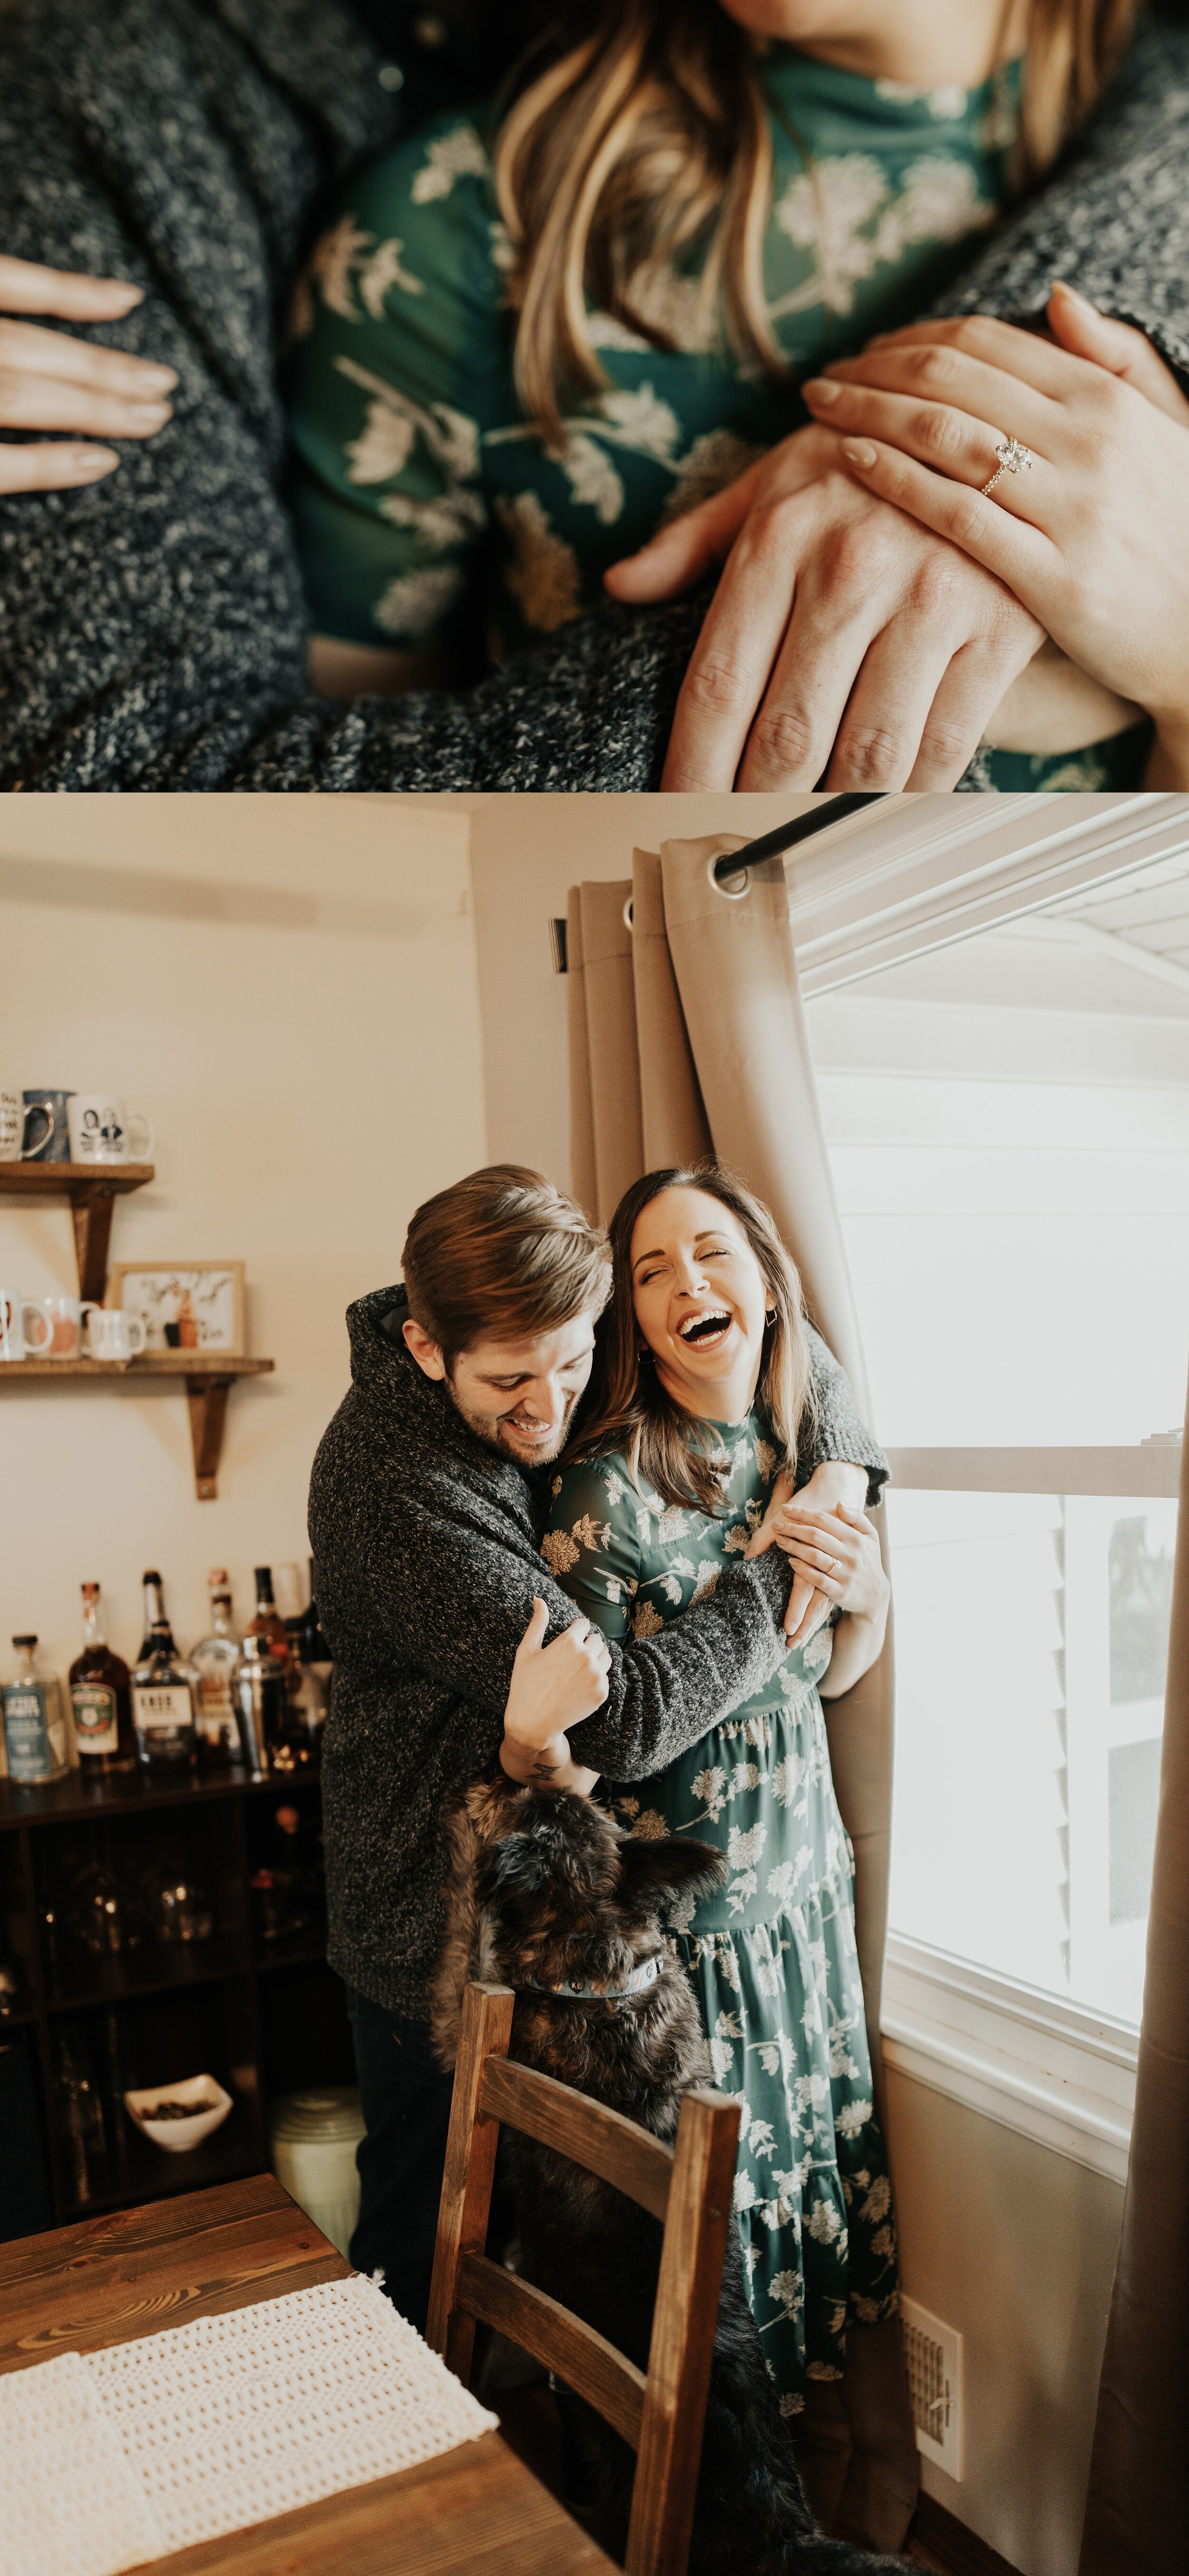 jessika-christine-photography-in+home-engagement-couples-cozy-adventurous-session (5).jpg